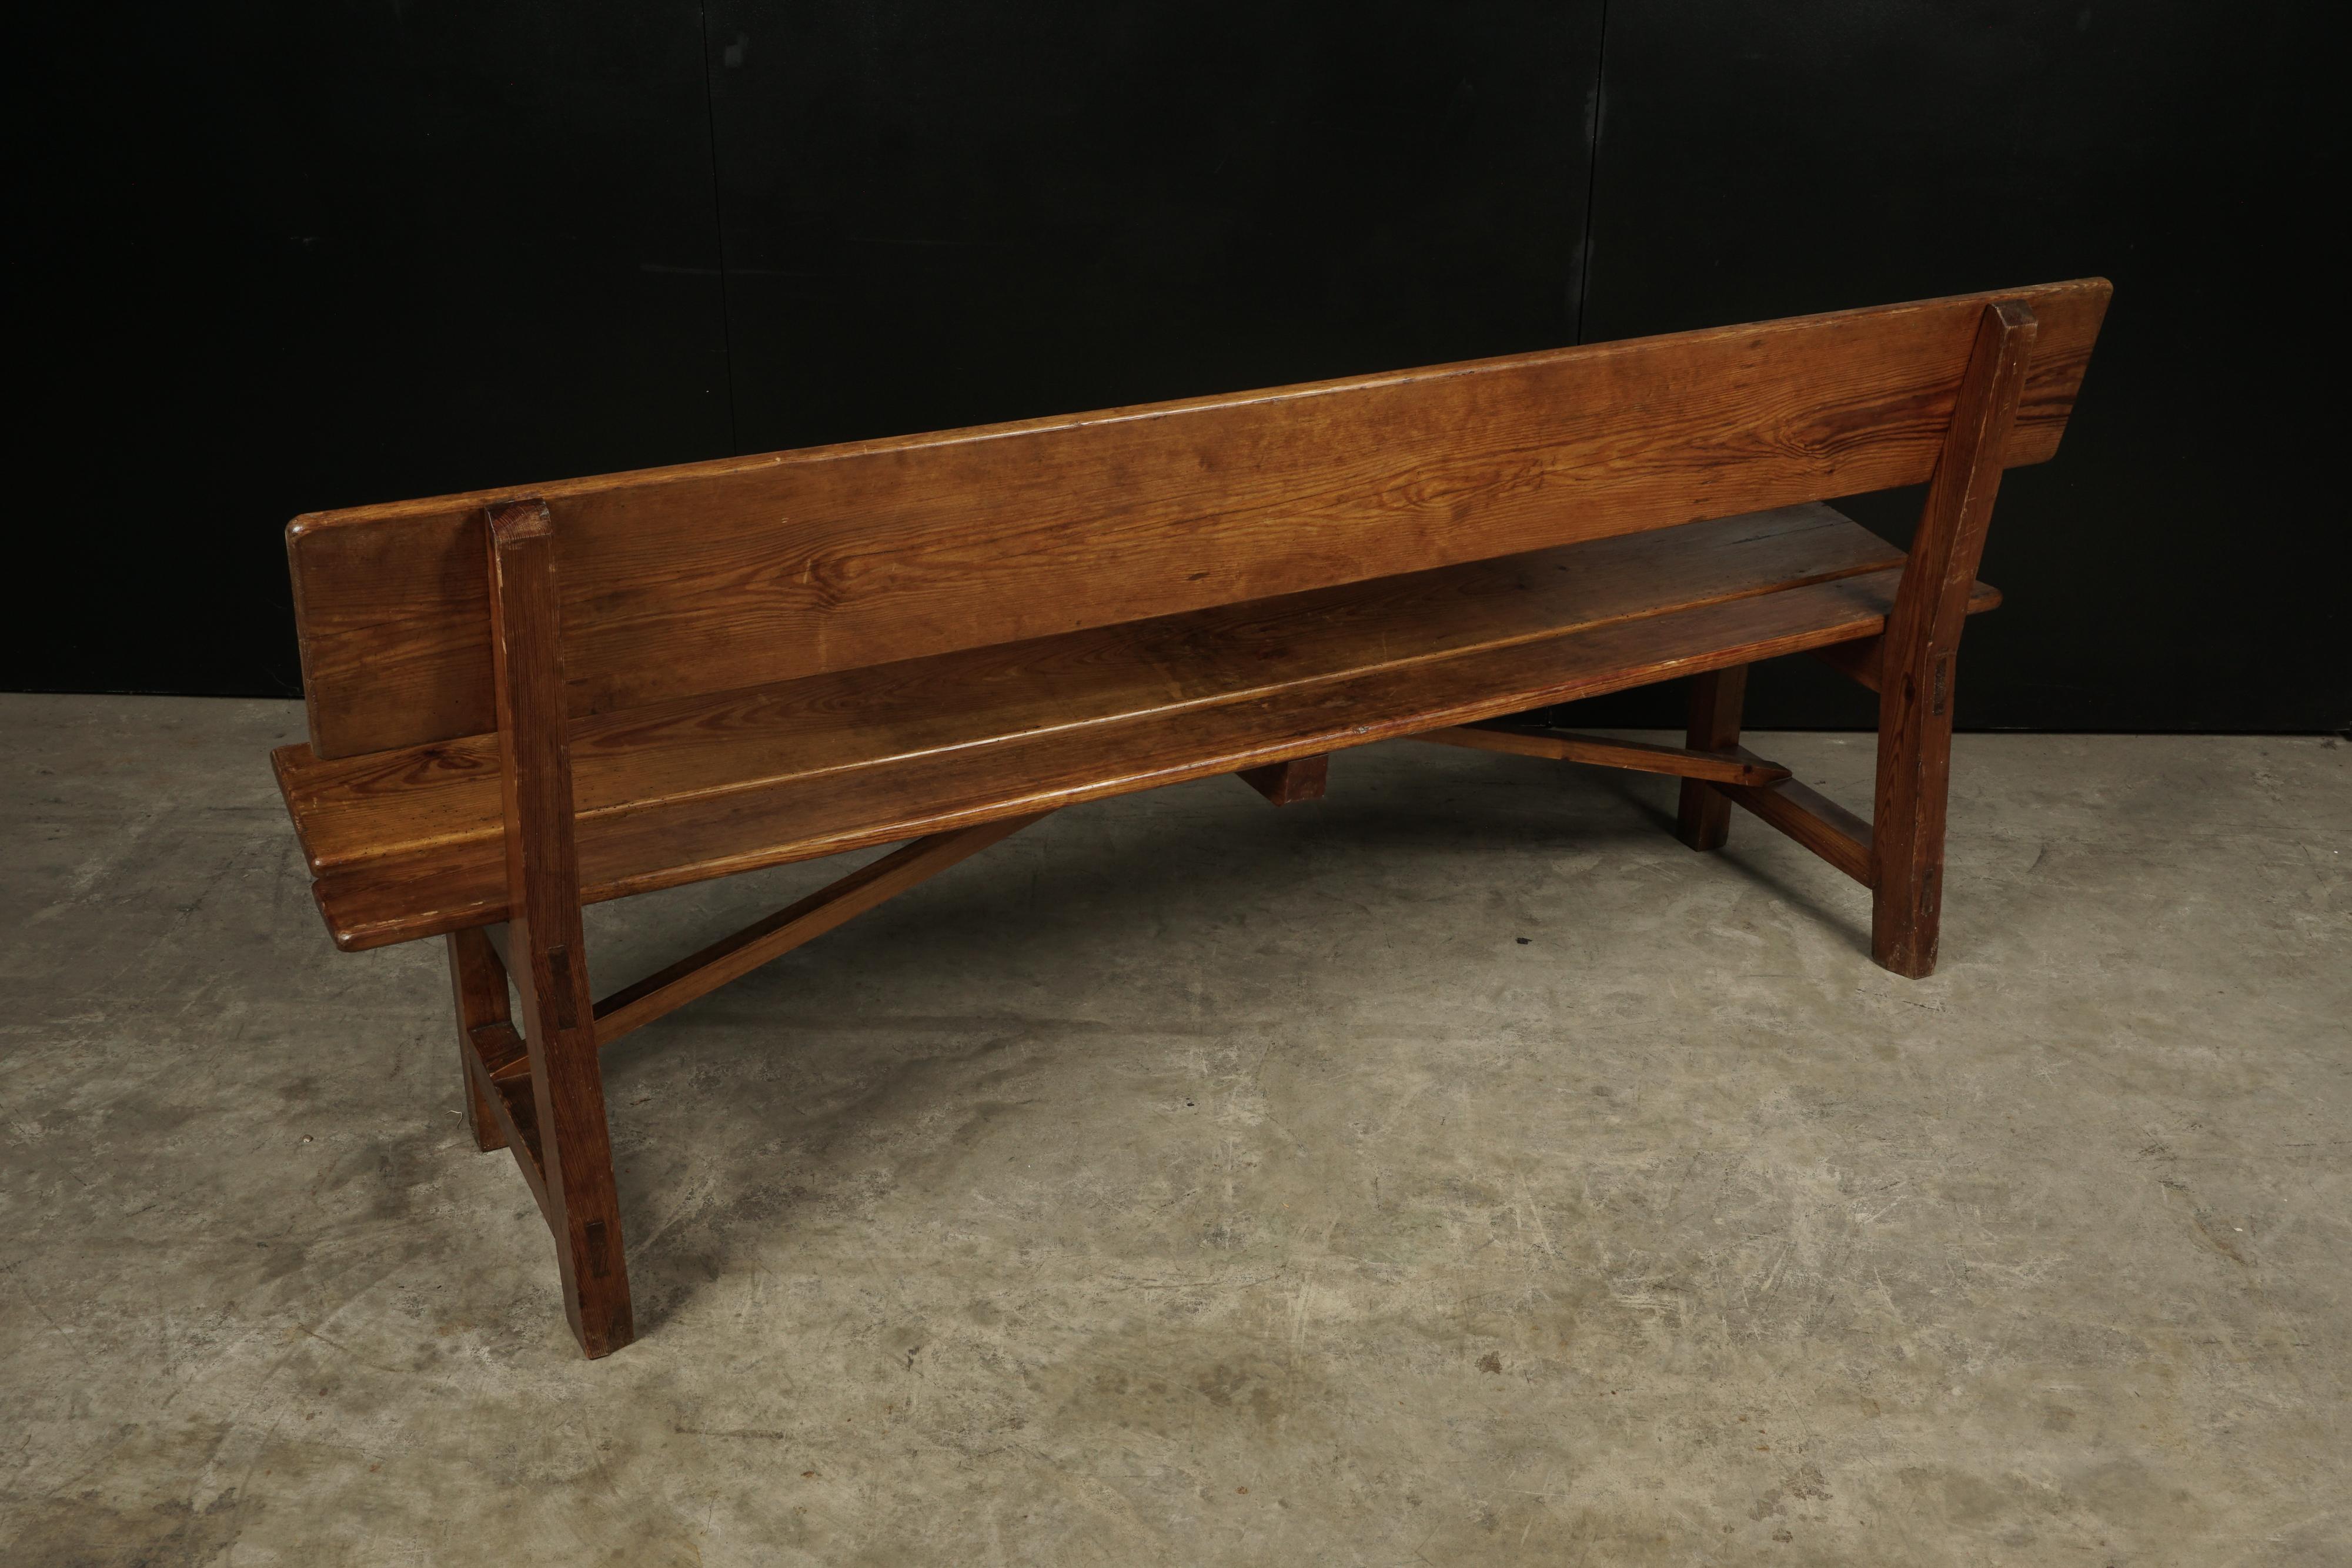 Midcentury pine bench from France, circa 1970. Rare model of solid pine with nice patina and wear.